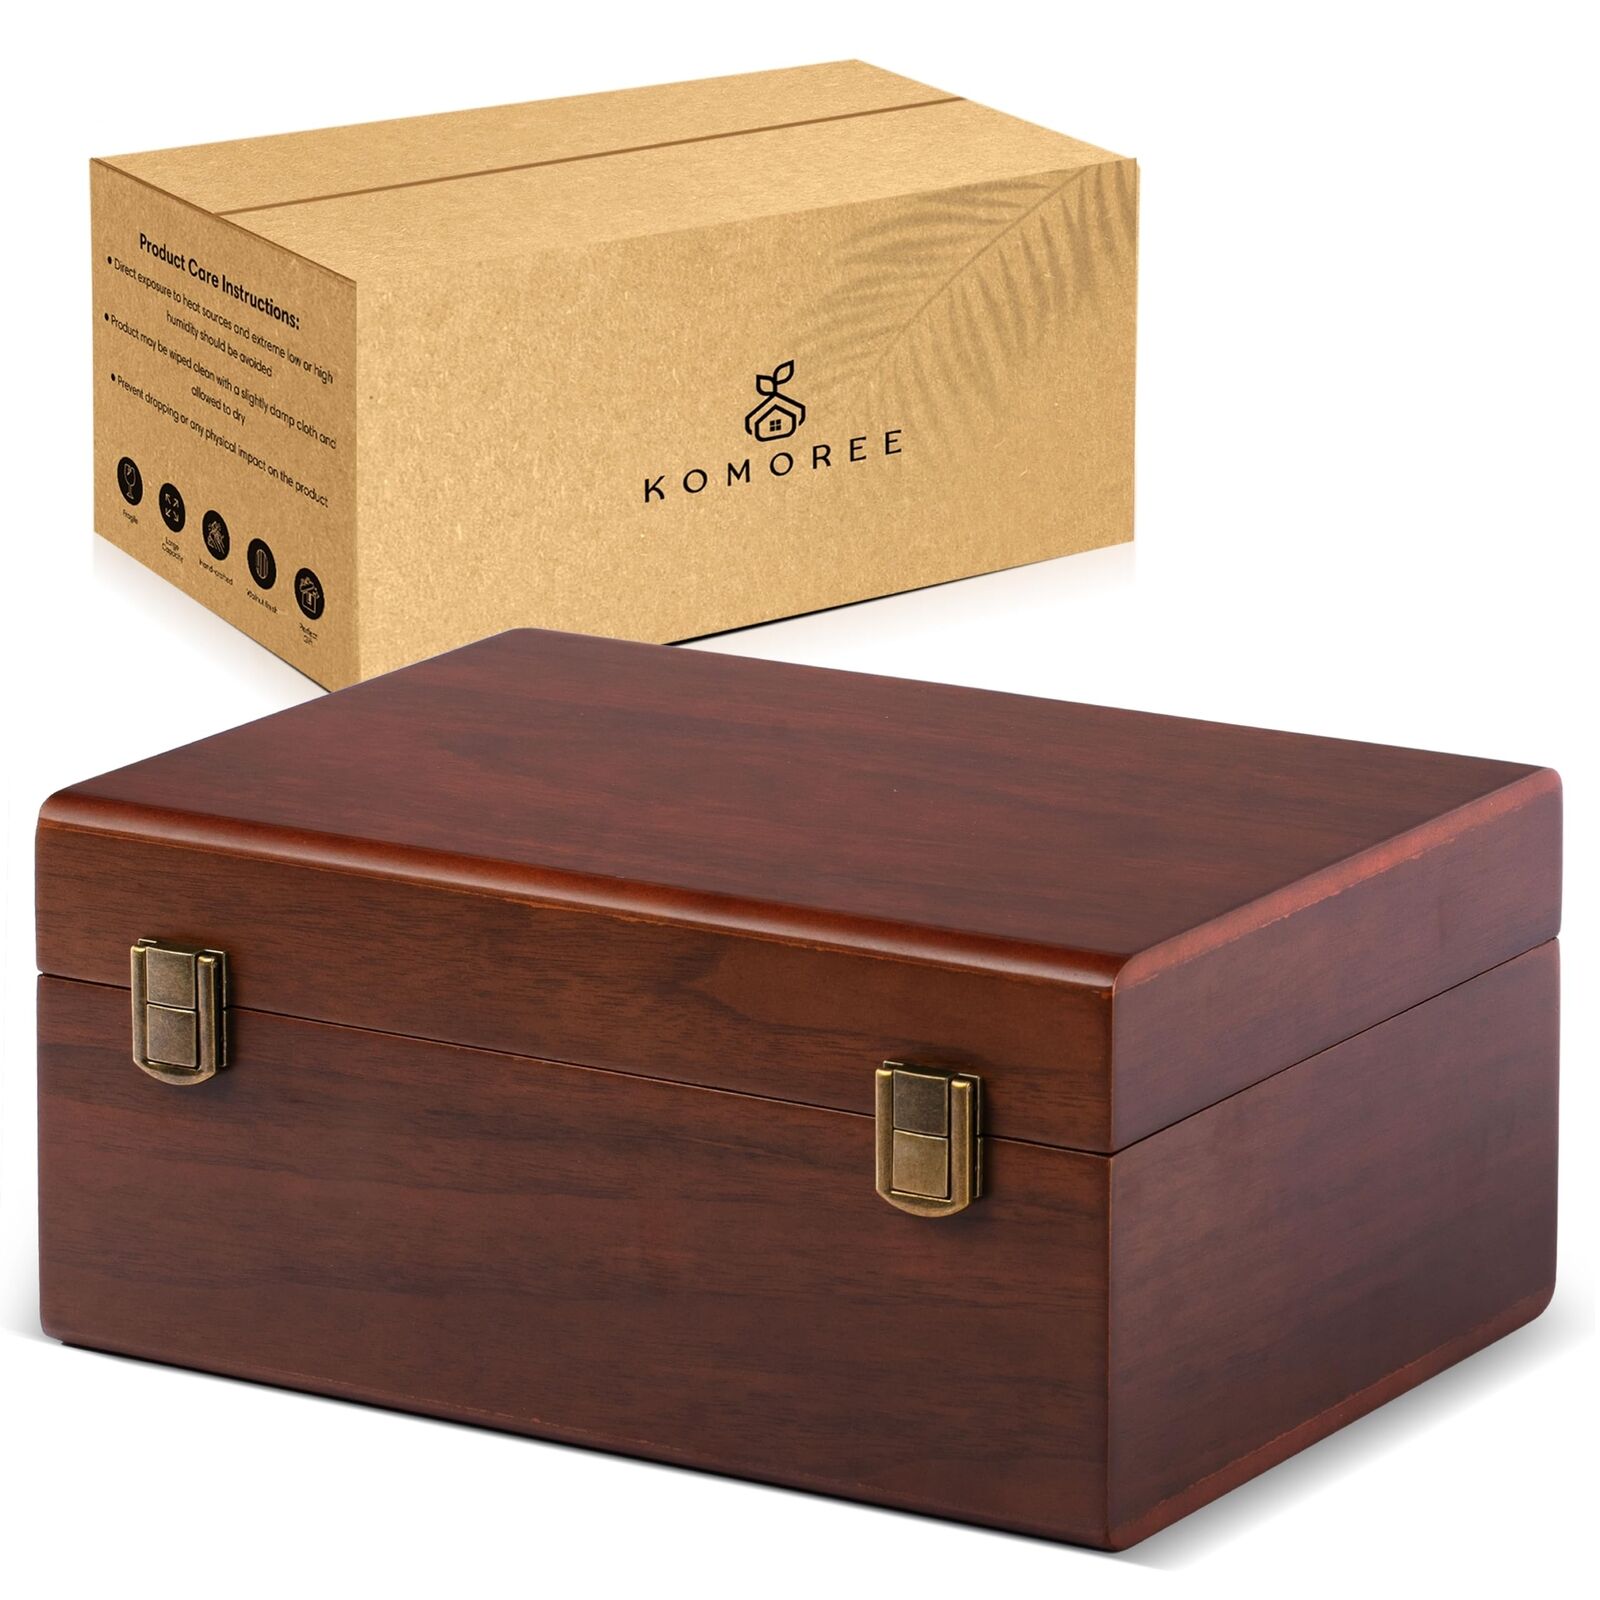 Wooden Keepsake Box - Large Walnut Wooden Storage Box with Hinged Lid and Dua...